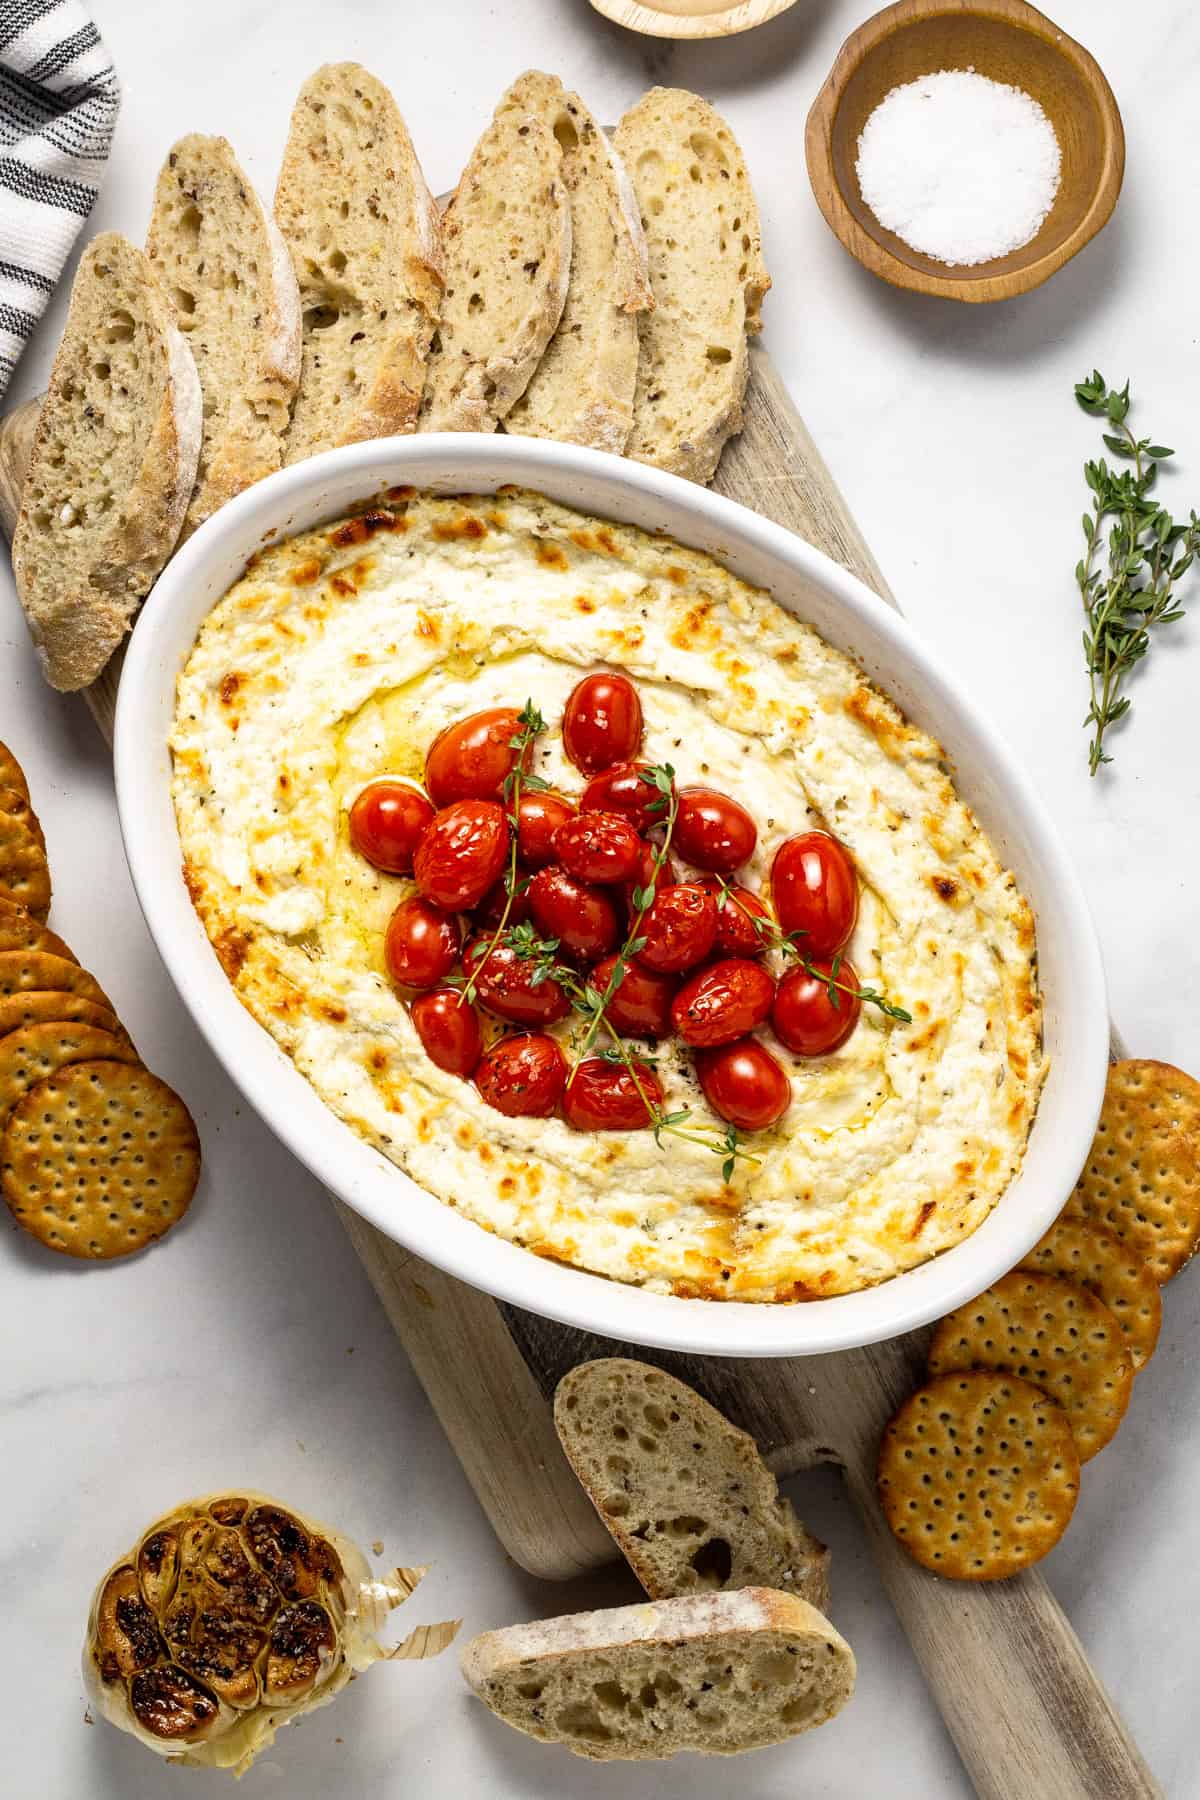 Overshot shot of baked goat cheese dip garnished with roasted tomatoes and fresh thyme.